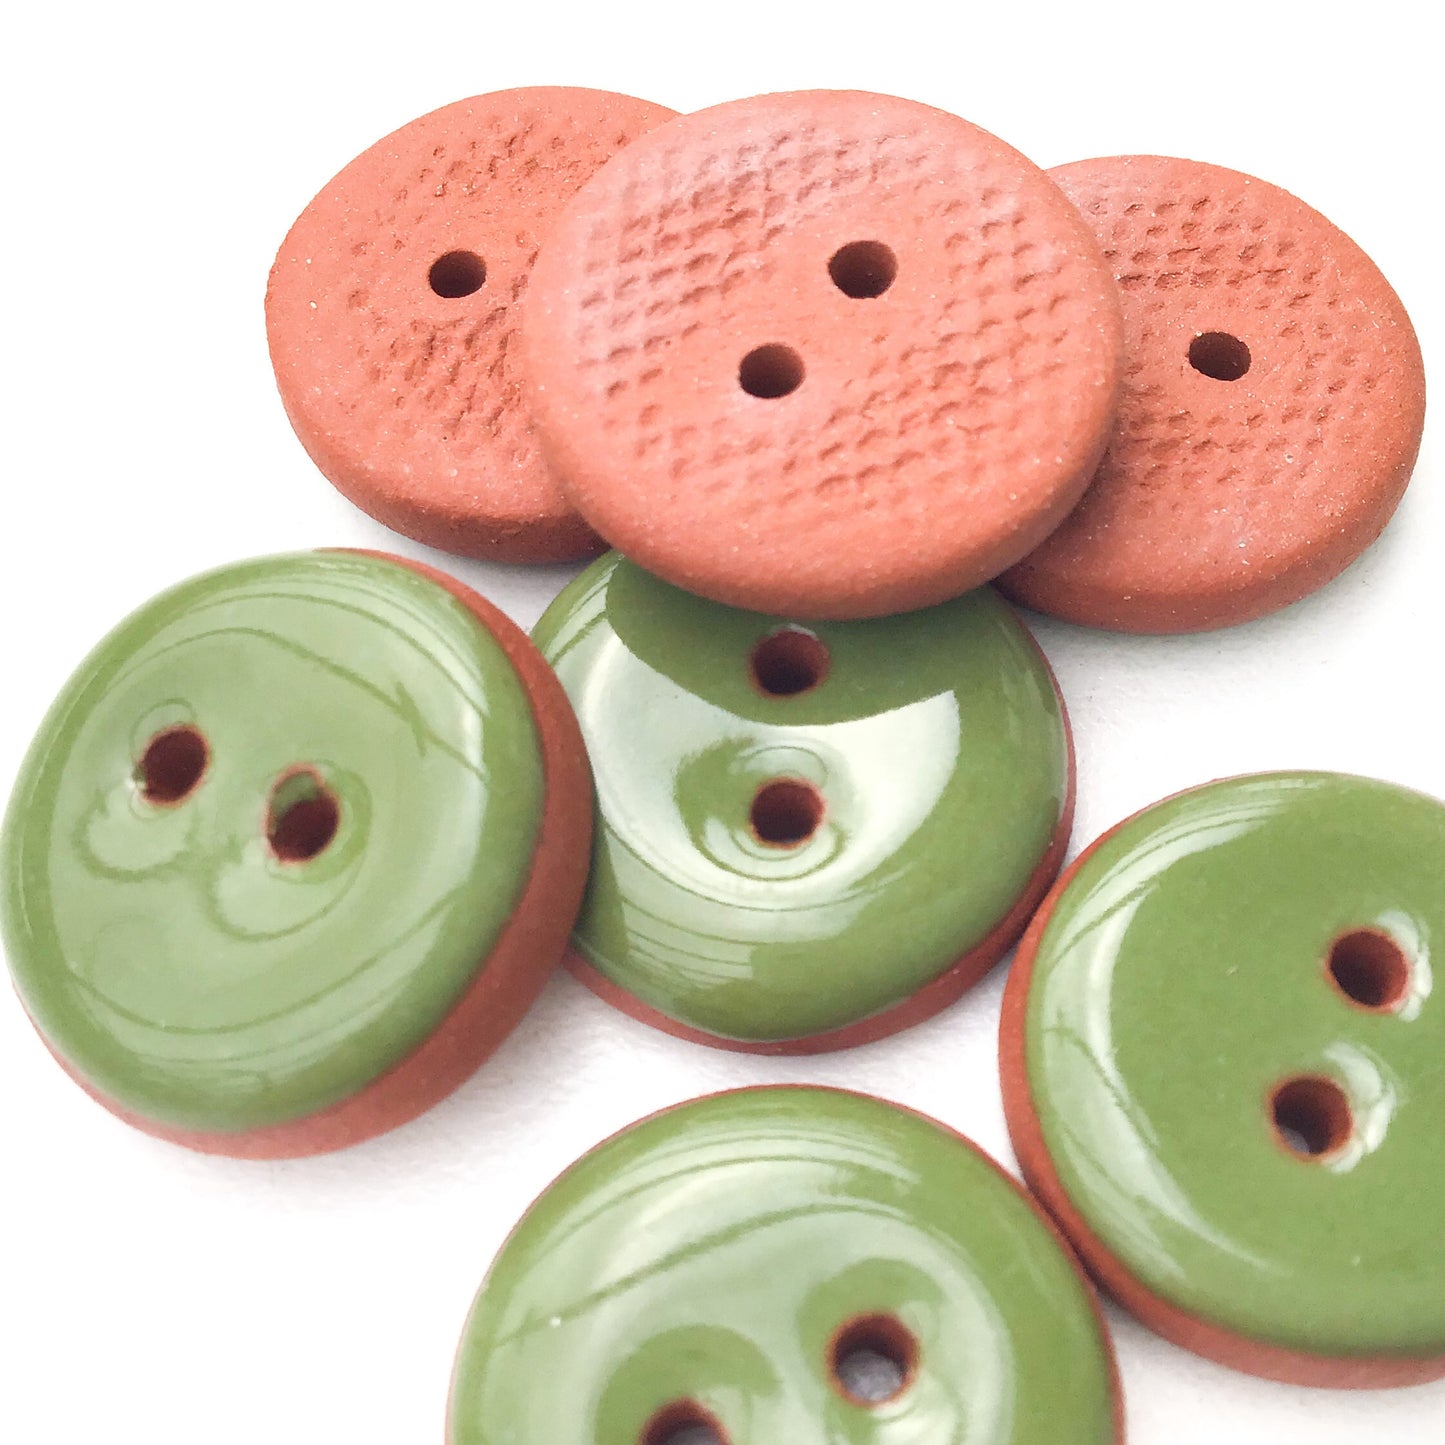 Olive Green Ceramic Buttons - Red Clay Buttons - 3/4" - 7 Pack